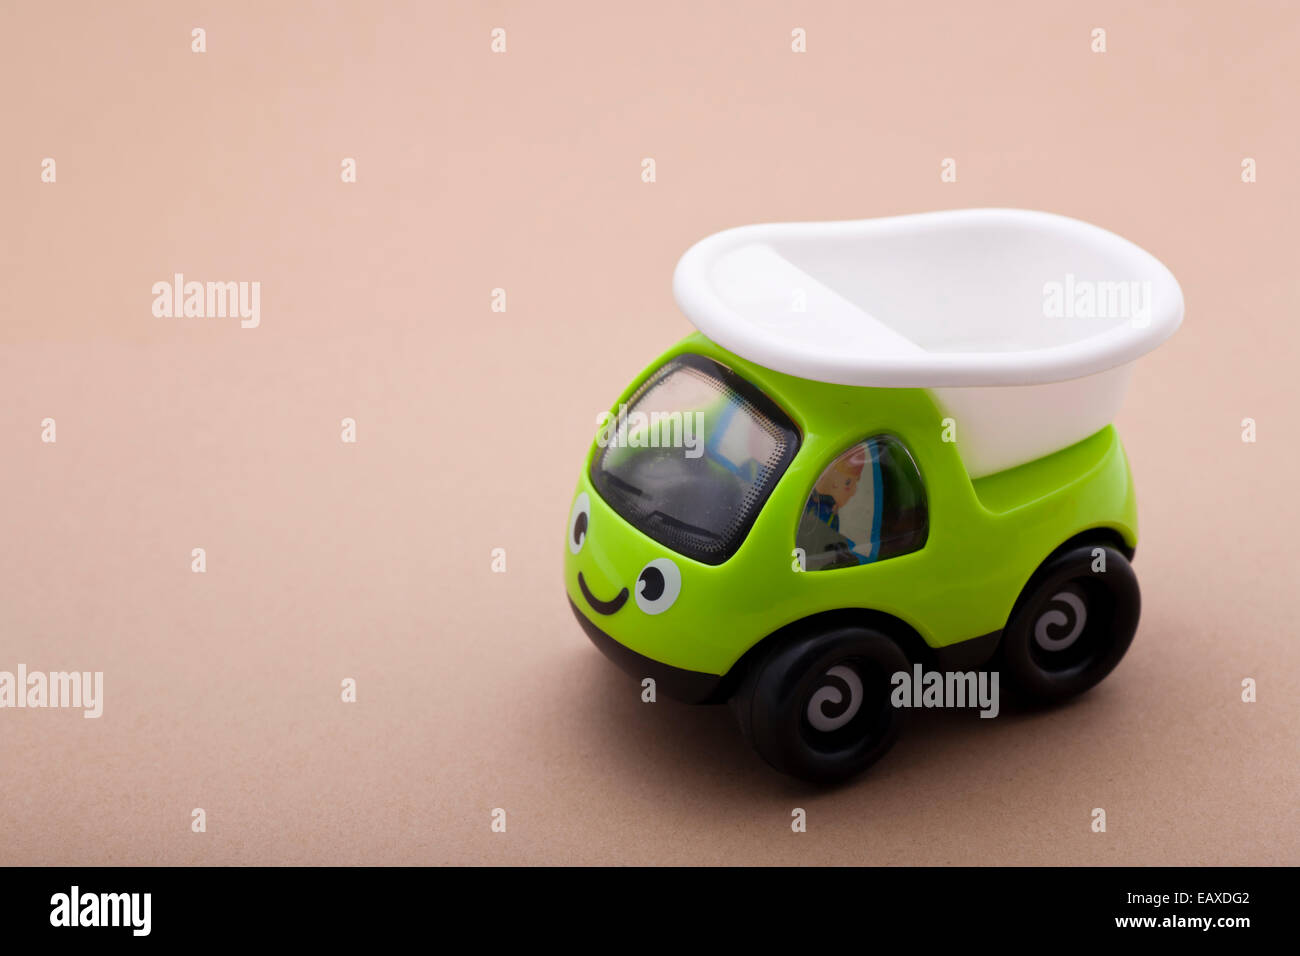 A green plastic toy truck Stock Photo